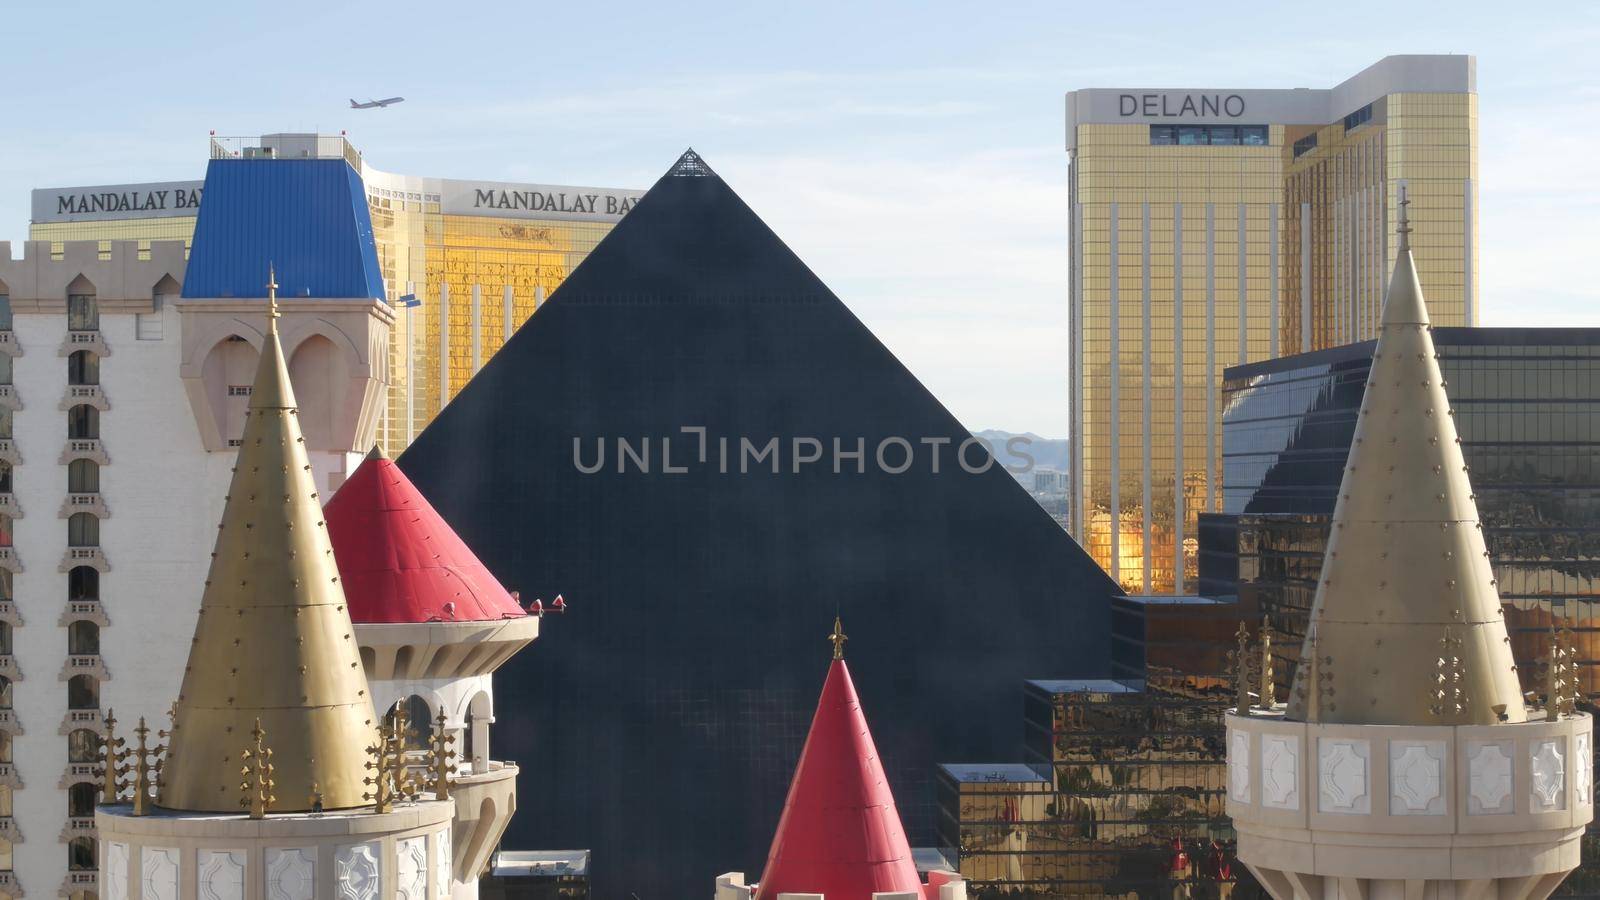 LAS VEGAS, NEVADA USA - 4 MAR 2020: Excalibur castle and Luxor pyramid casino uncommon aerial view. Plane flying from McCarran airport. Mandalay Bay and Delano hotel in american gambling sin city by DogoraSun